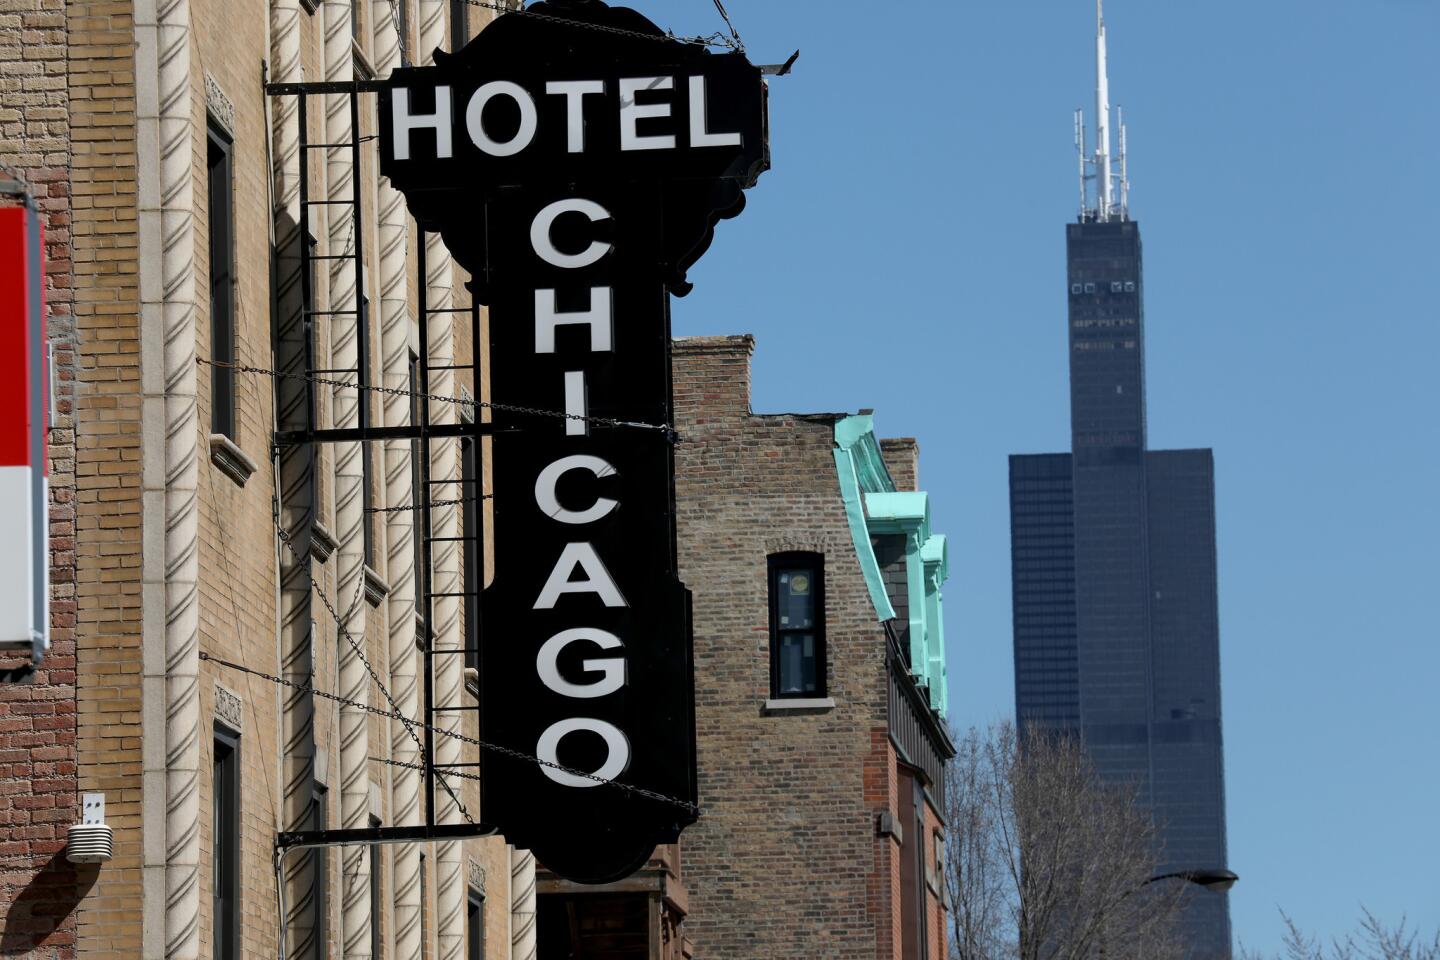 The Hotel Chicago West Loop in Chicago’s Near West Side neighborhood features original artwork in each of the rooms.